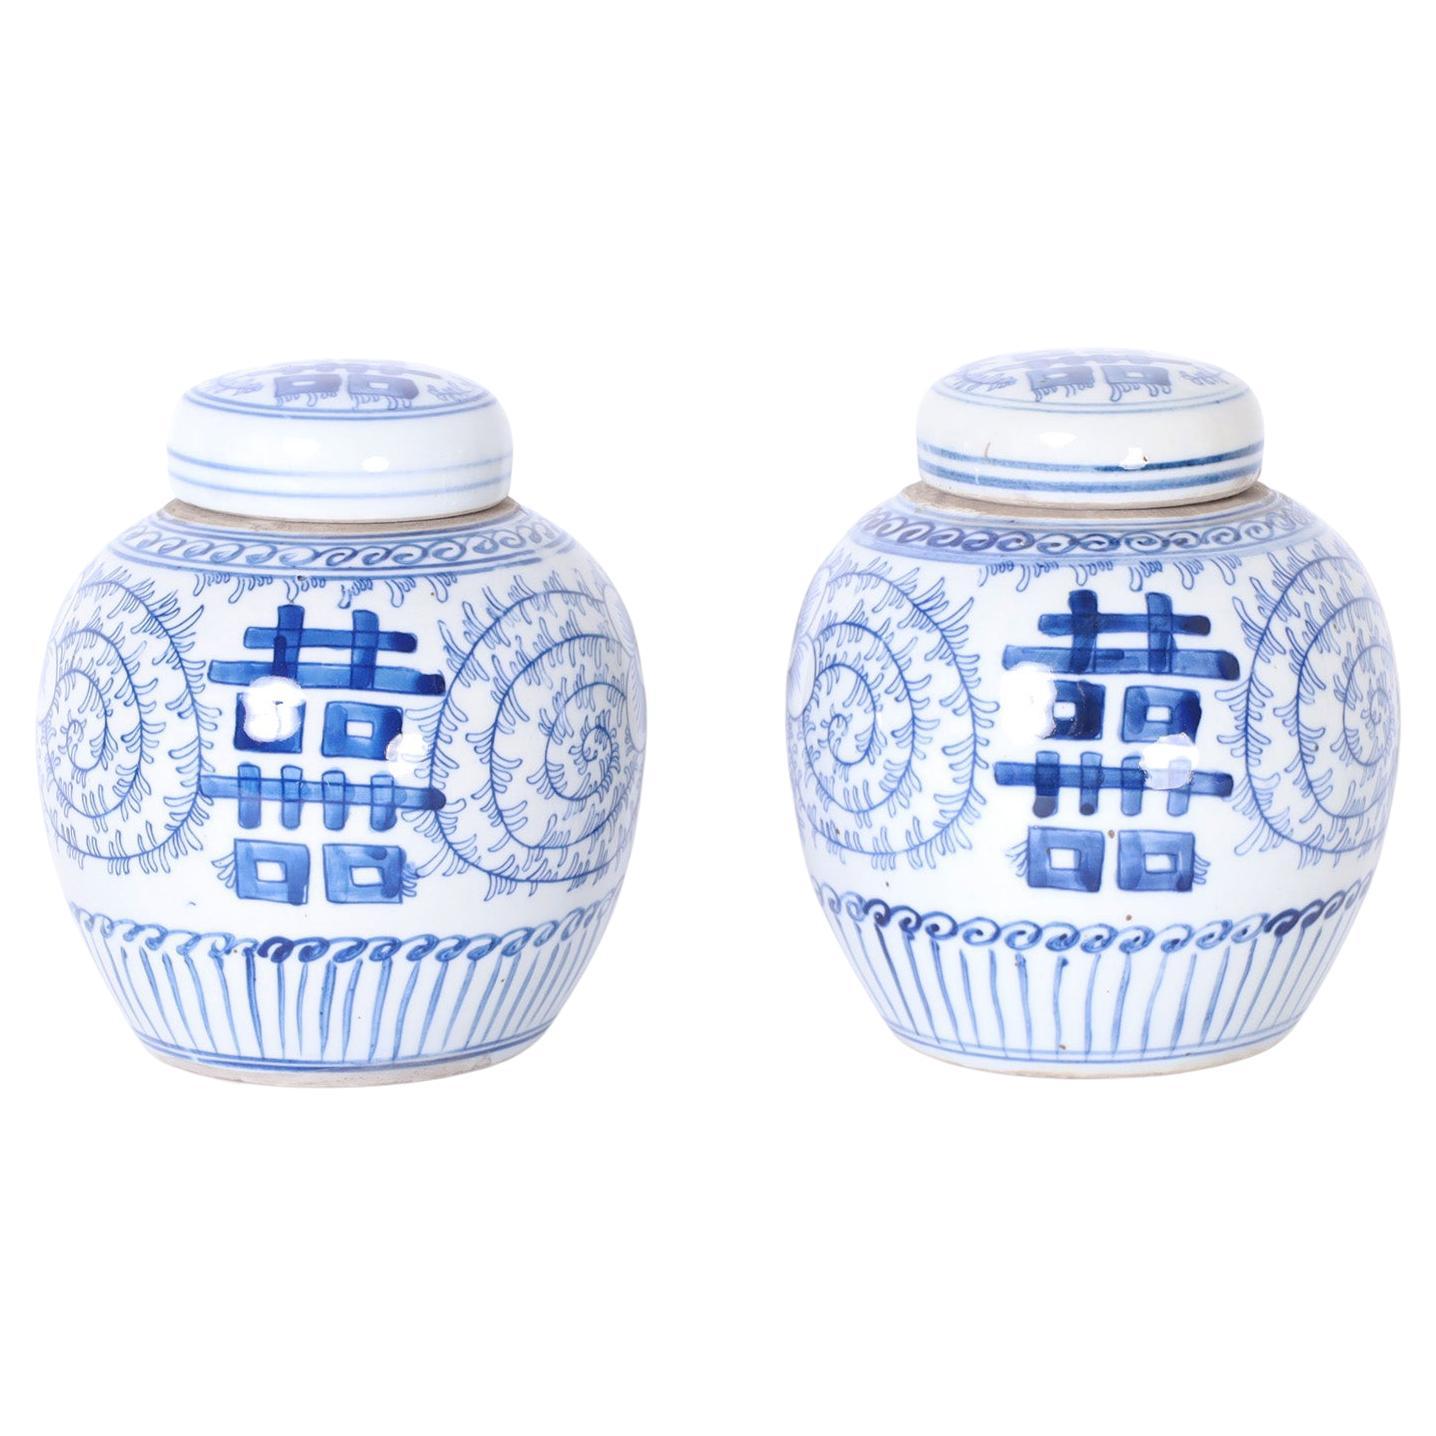 Pair of Chinese Blue and White Porcelain Double Happiness Tea Caddies For Sale